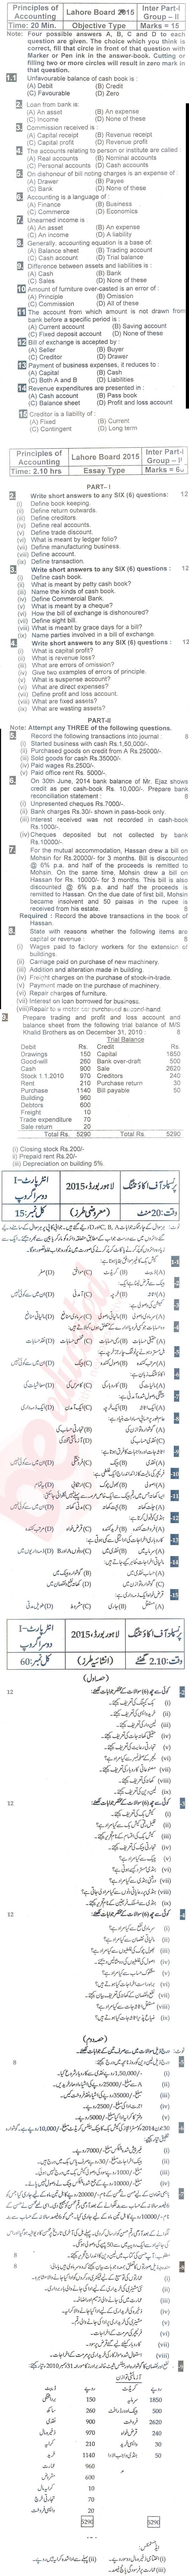 Principles of Accounting ICOM Part 1 Past Paper Group 2 BISE Lahore 2015